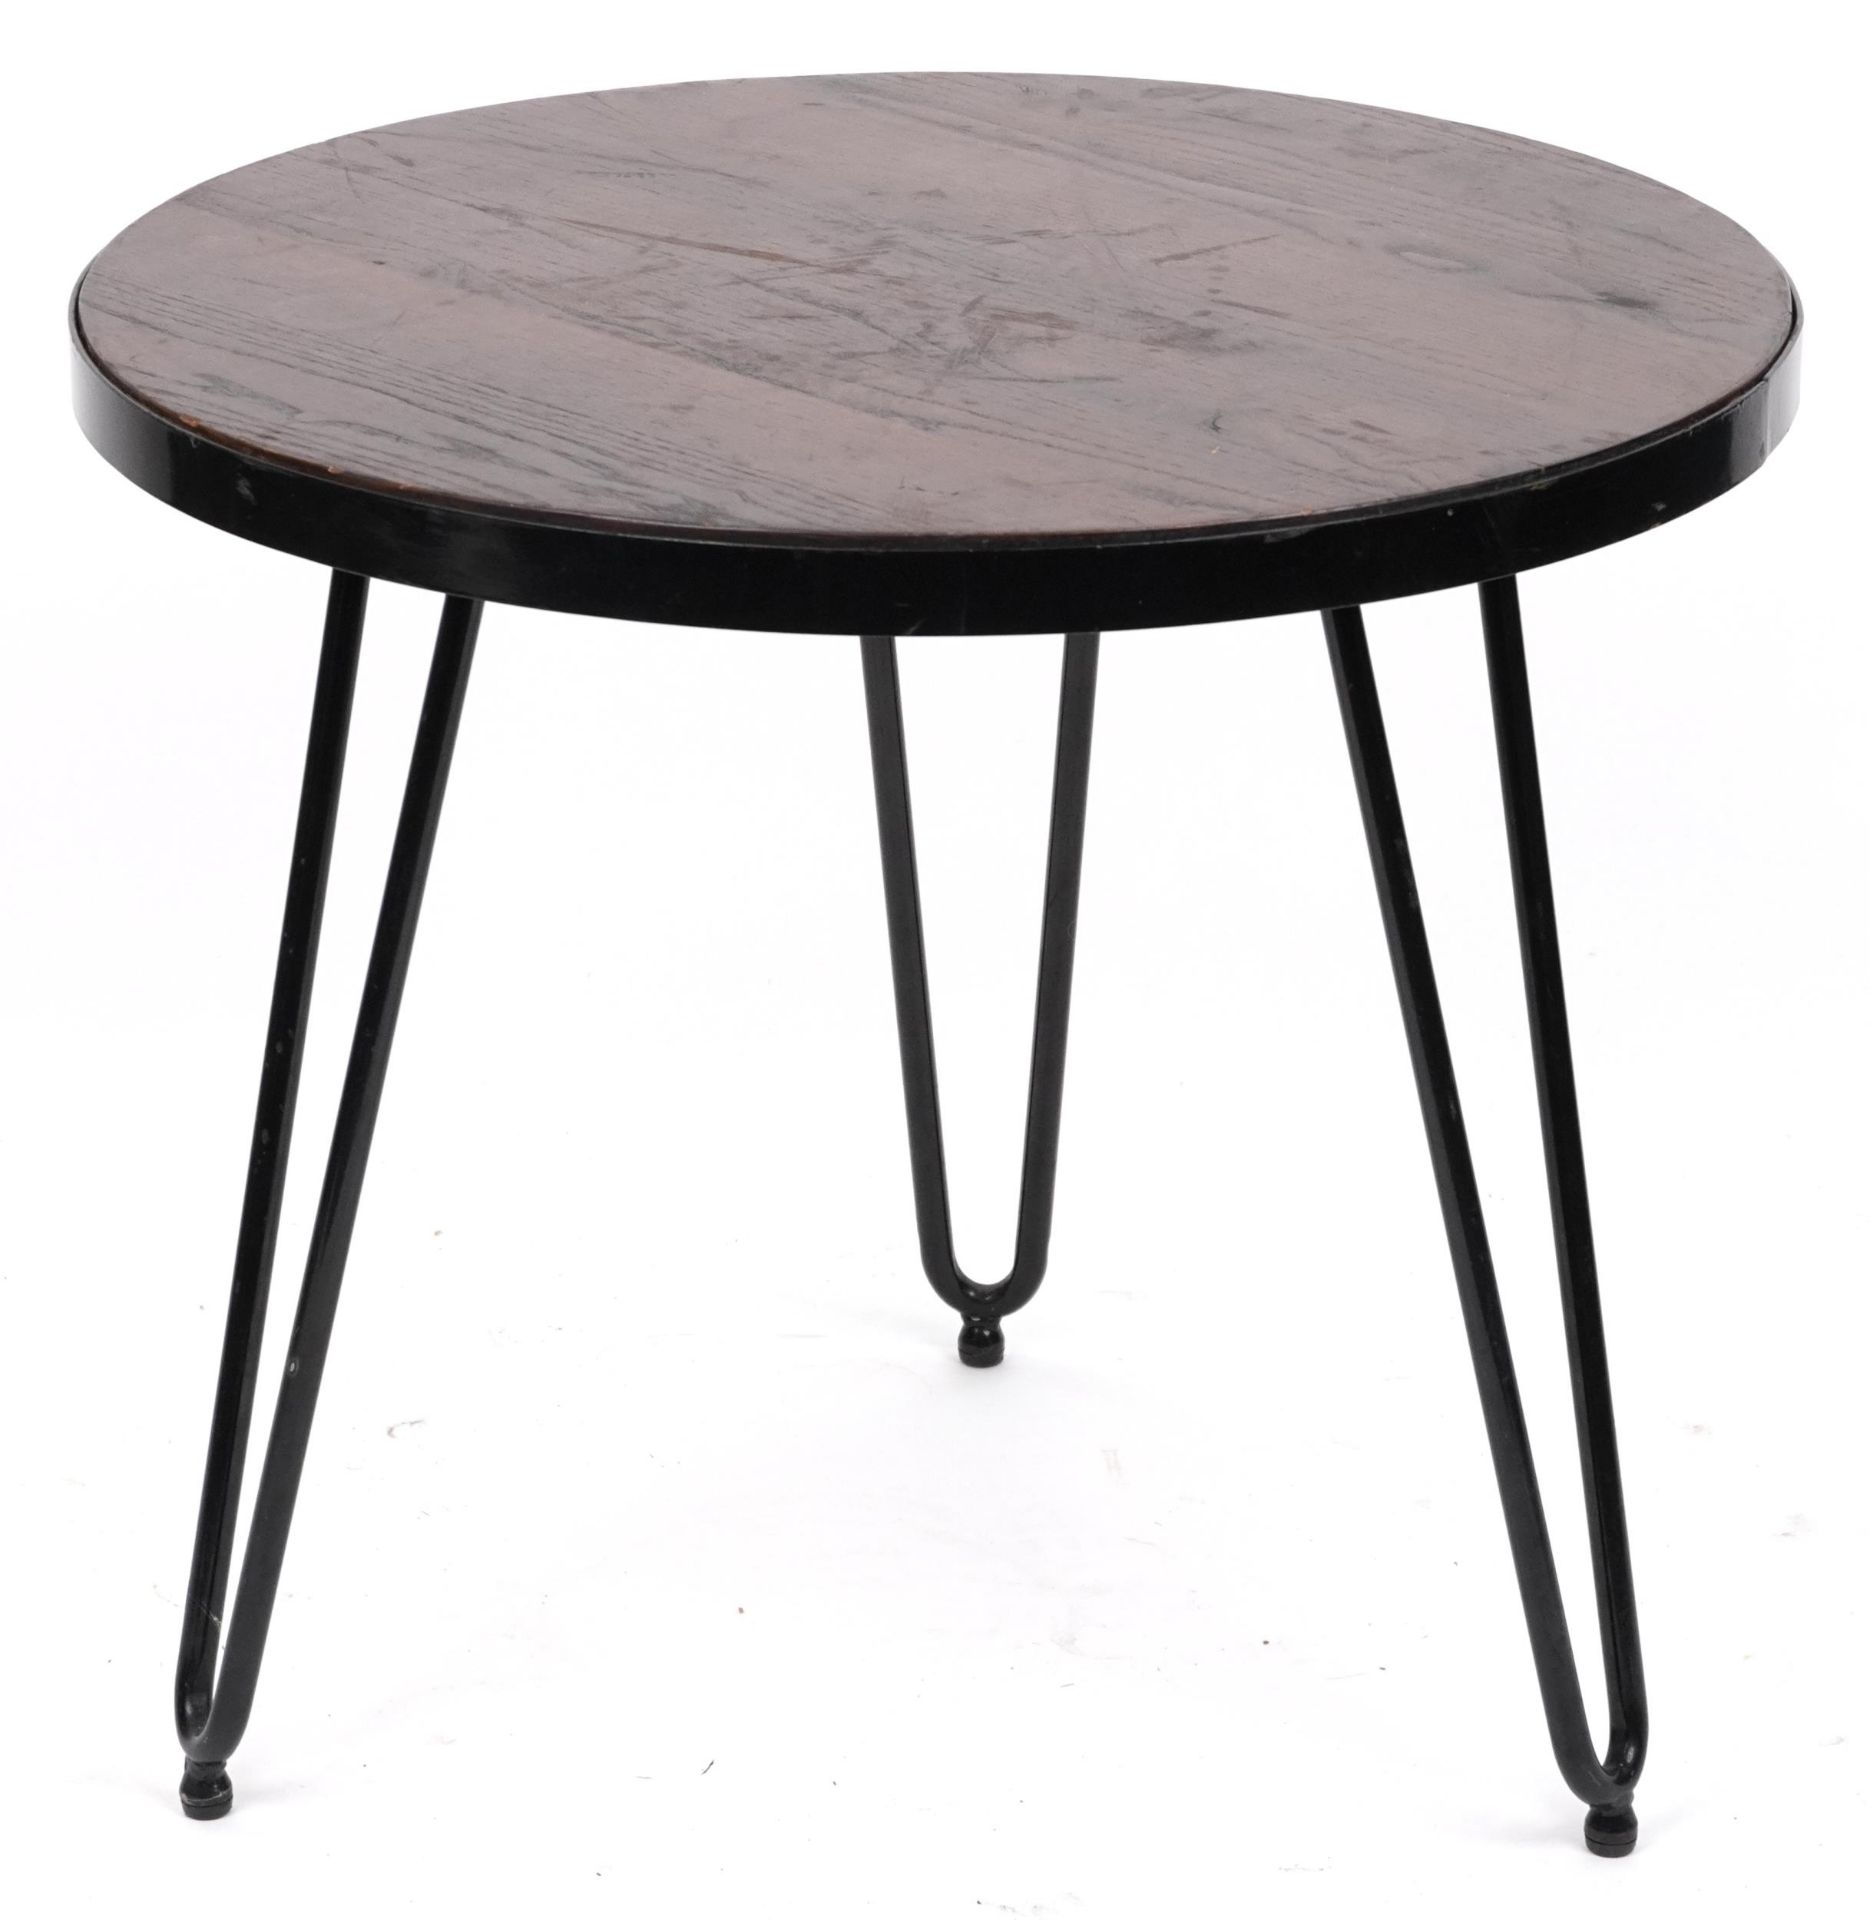 Industrial circular hardwood and wrought iron occasional table with hairpin legs, 53.5cm high x 61cm - Image 3 of 3